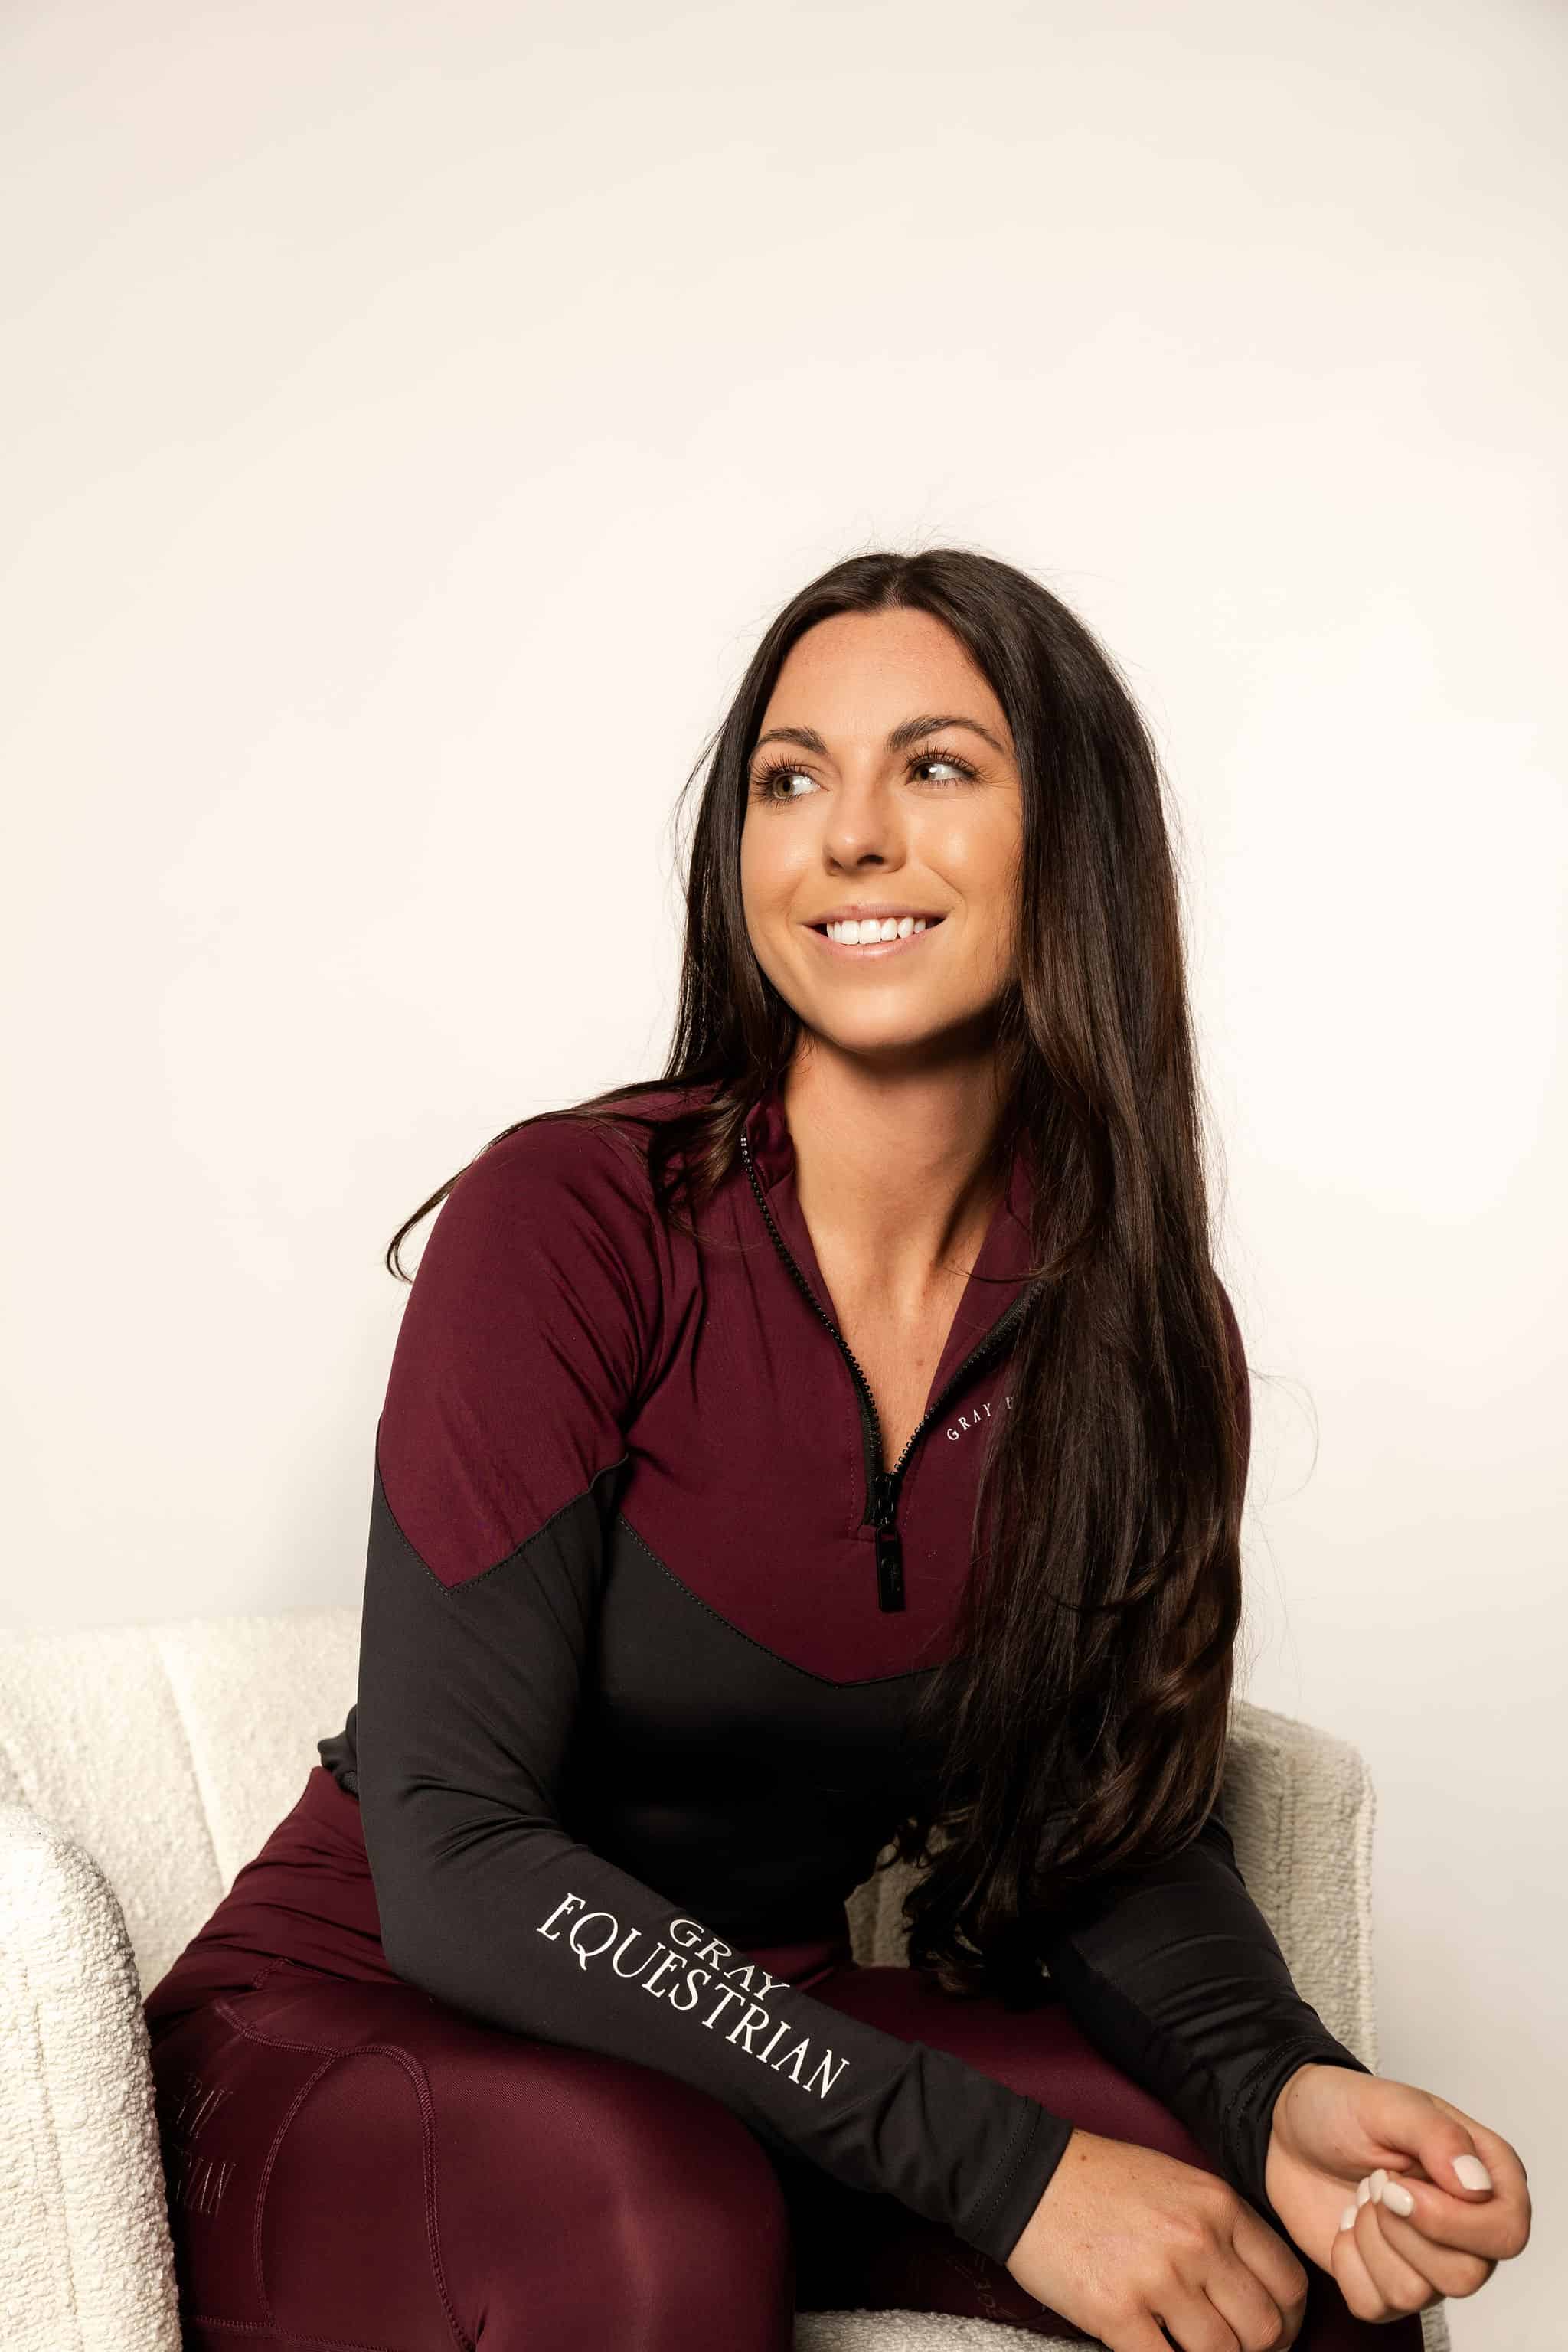 Brunette model wearing burgundy and grey base layer top with burgundy riding leggings in chair.